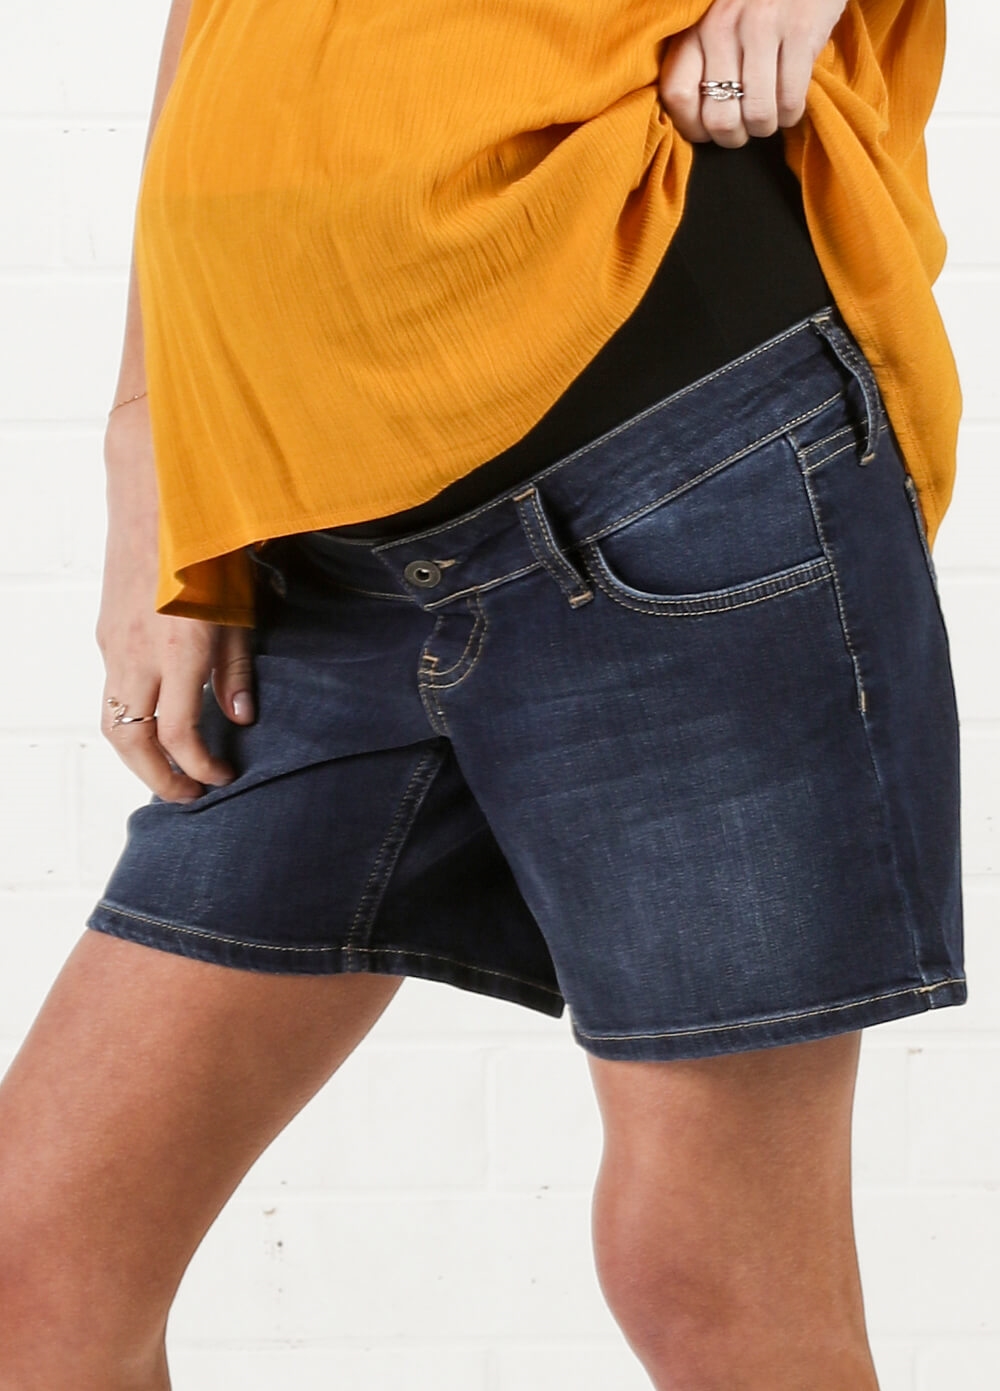 Mums & Bumps - Blanqi - Maternity Belly Support Jeans Shorts